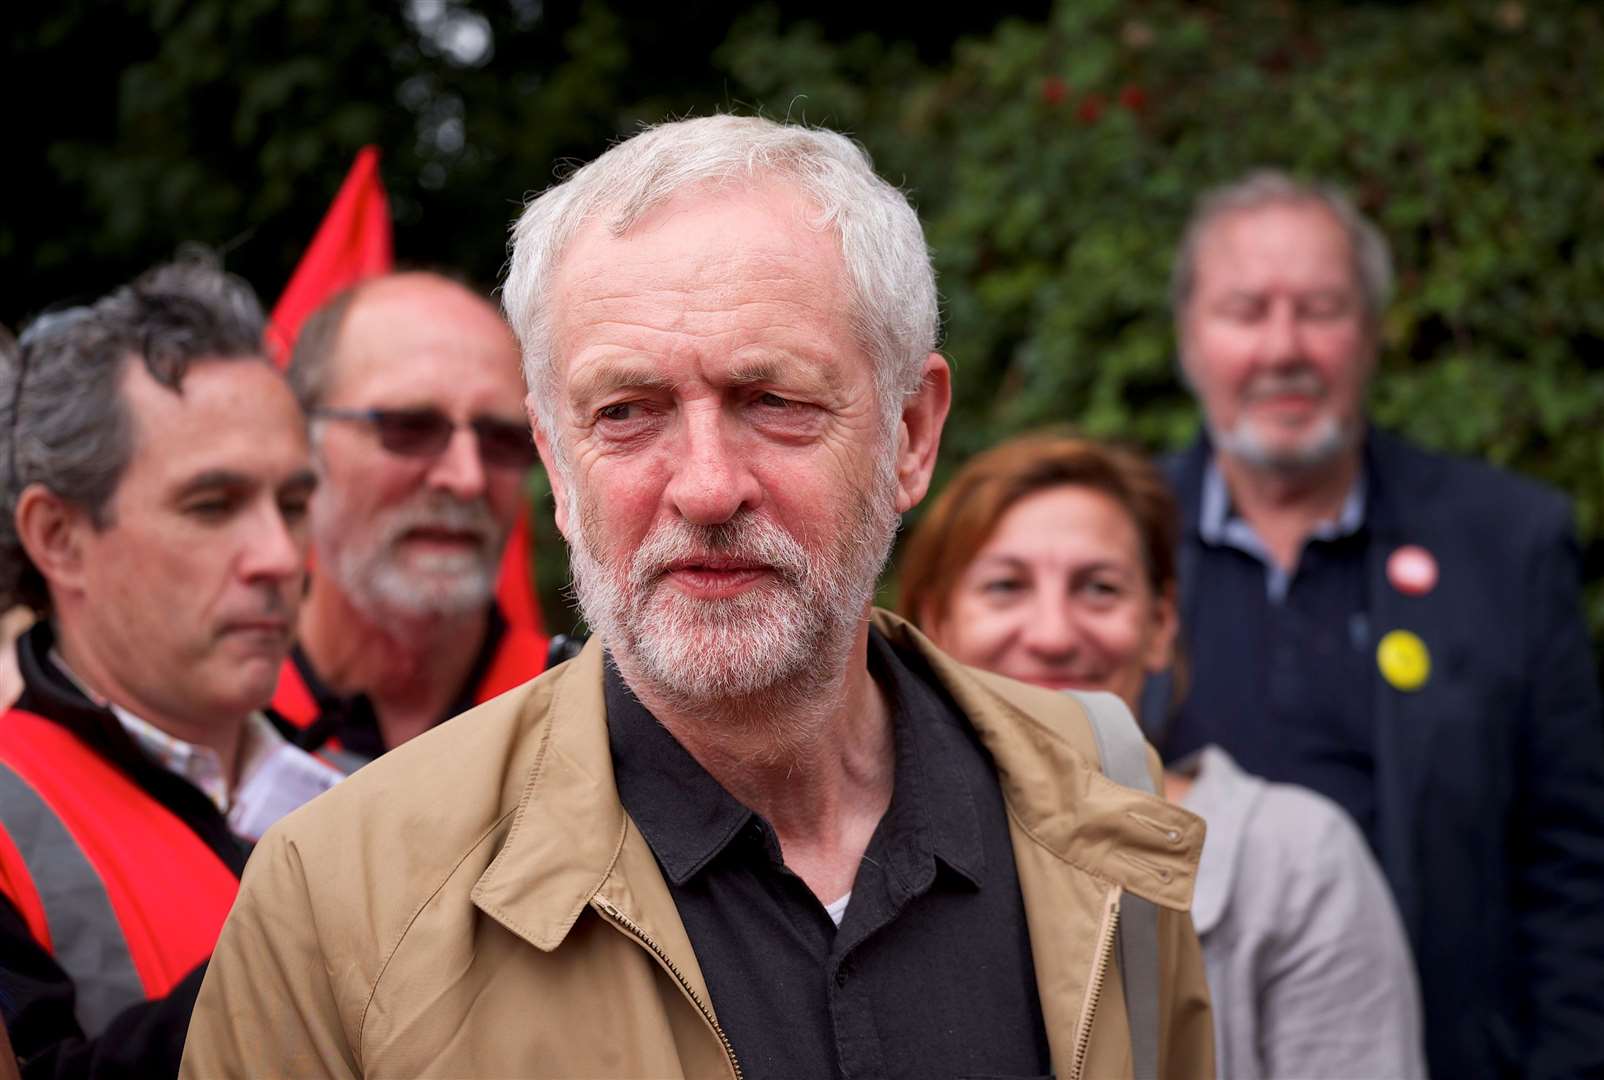 Is having once stood next to Jeremy Corbyn now enough to get you suspended from the Labour Party?